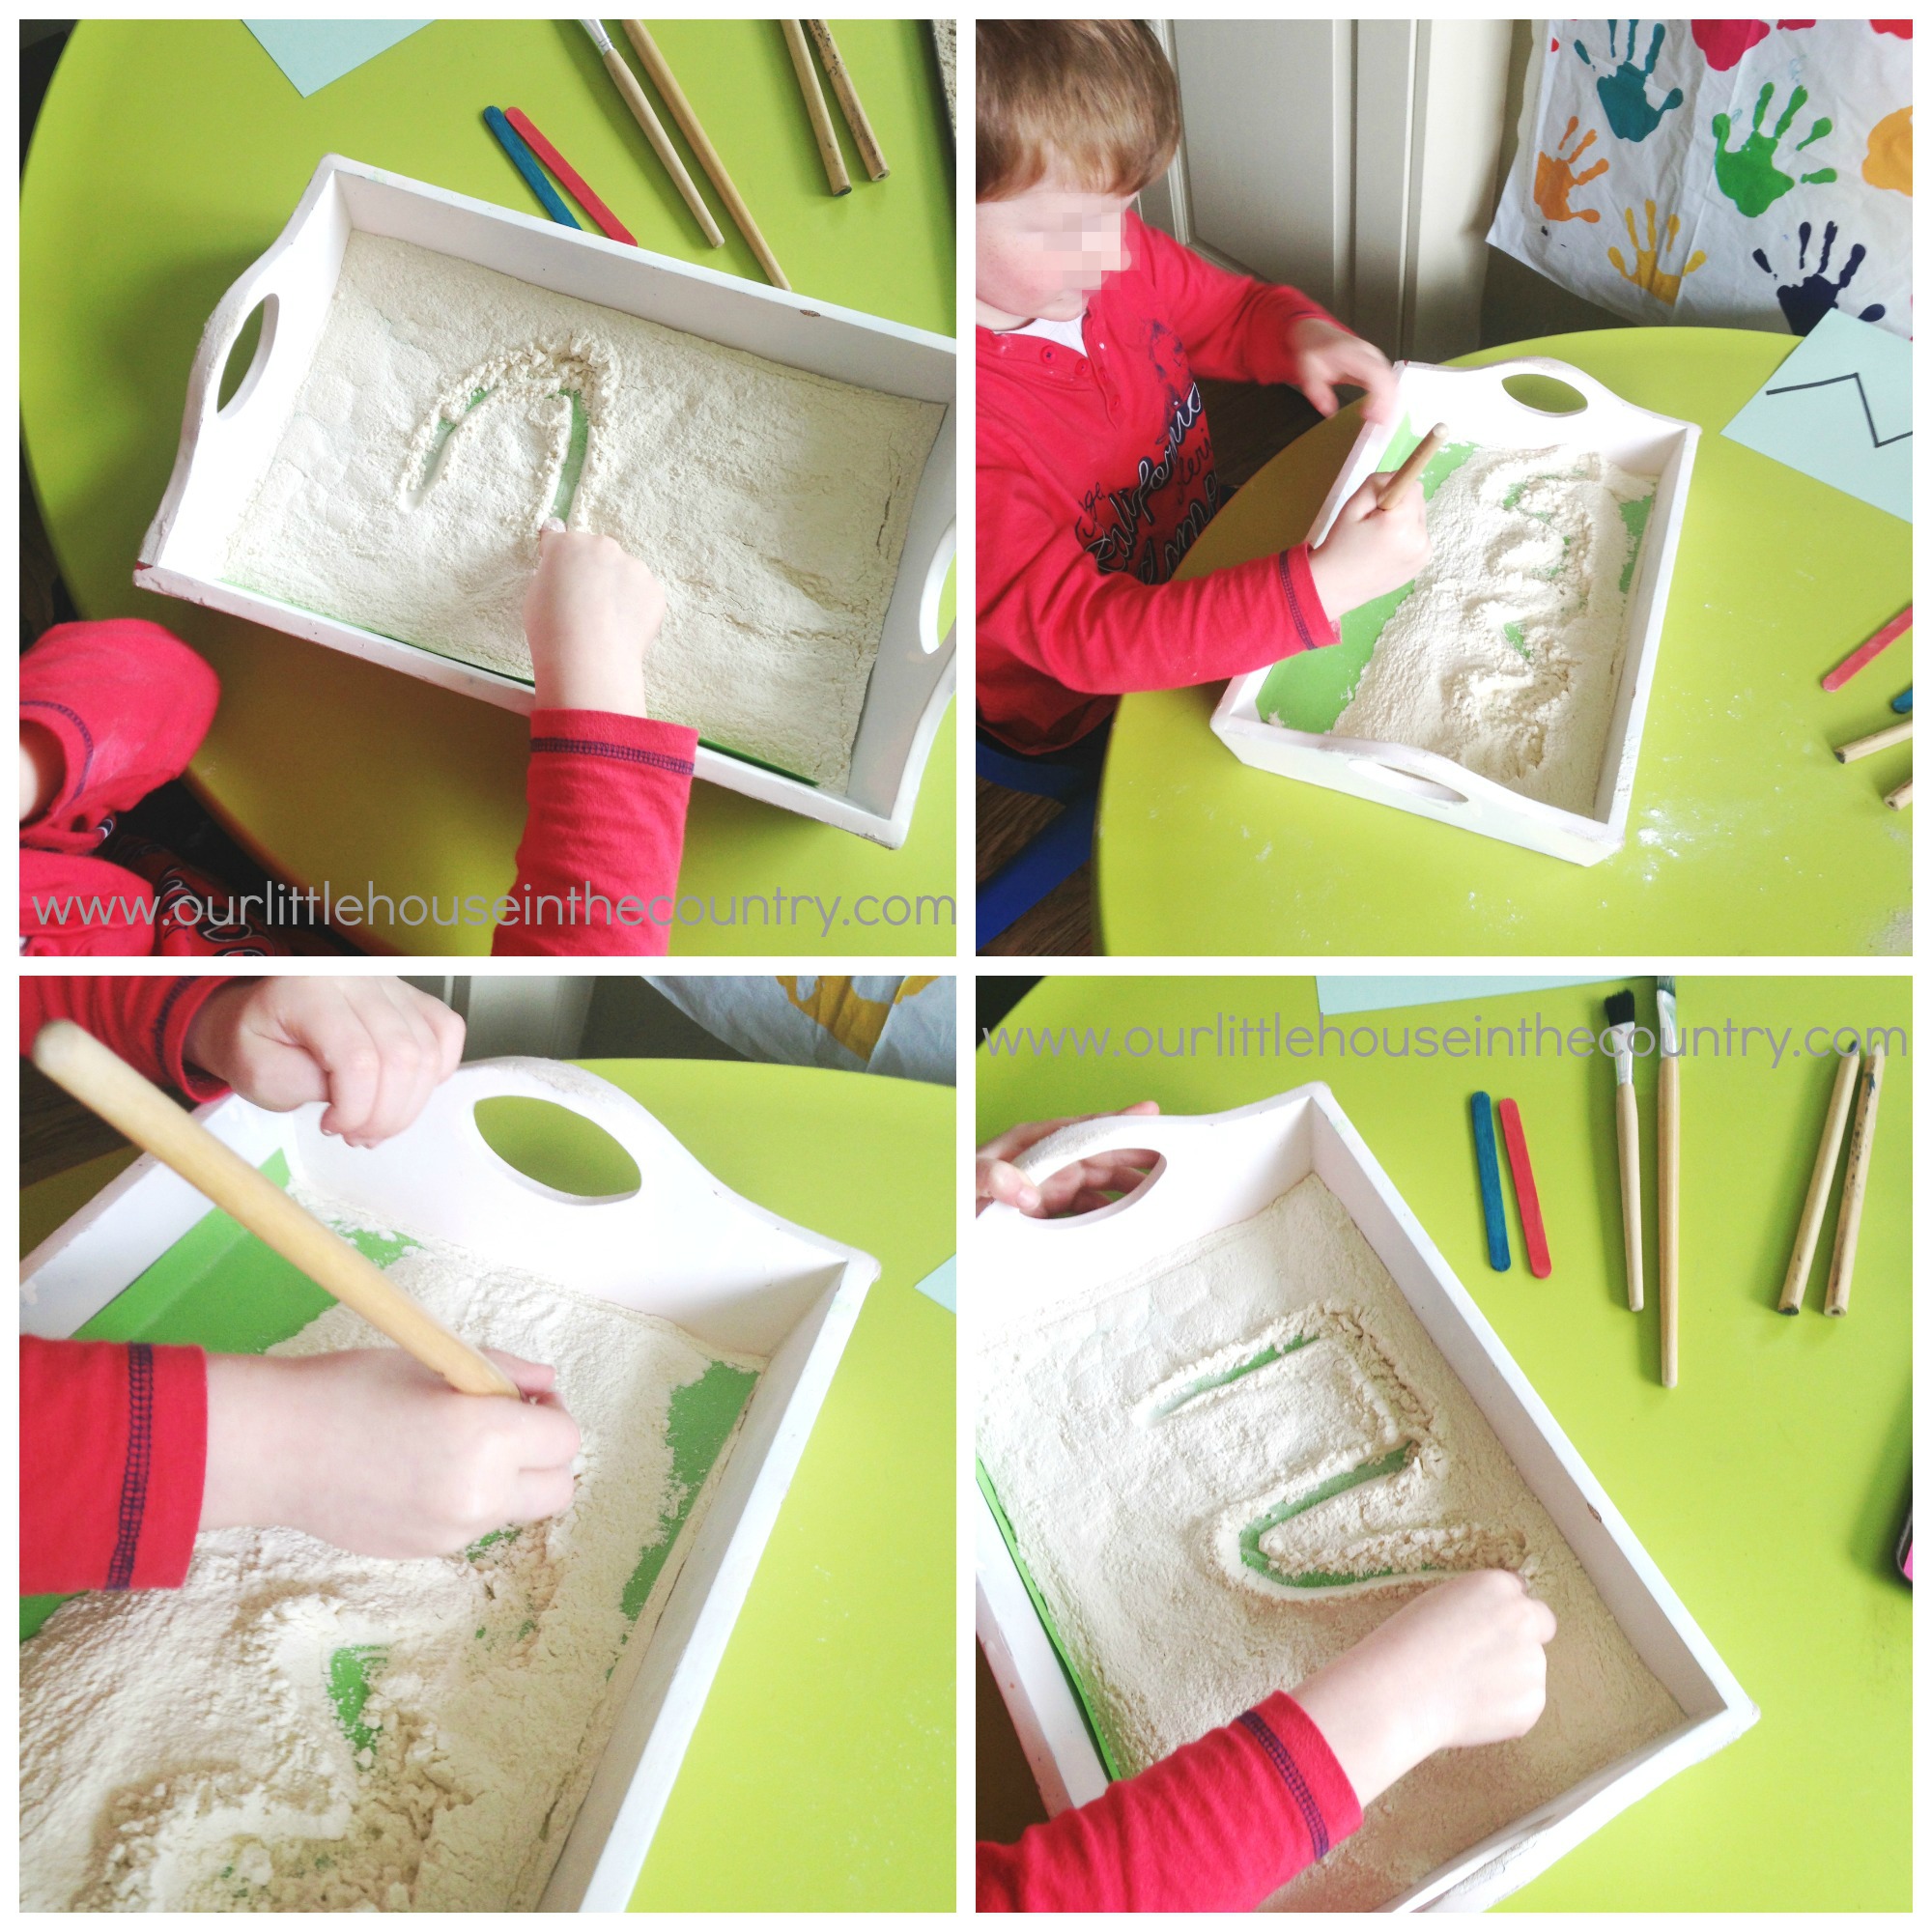 Writing activities for 3 year olds at home